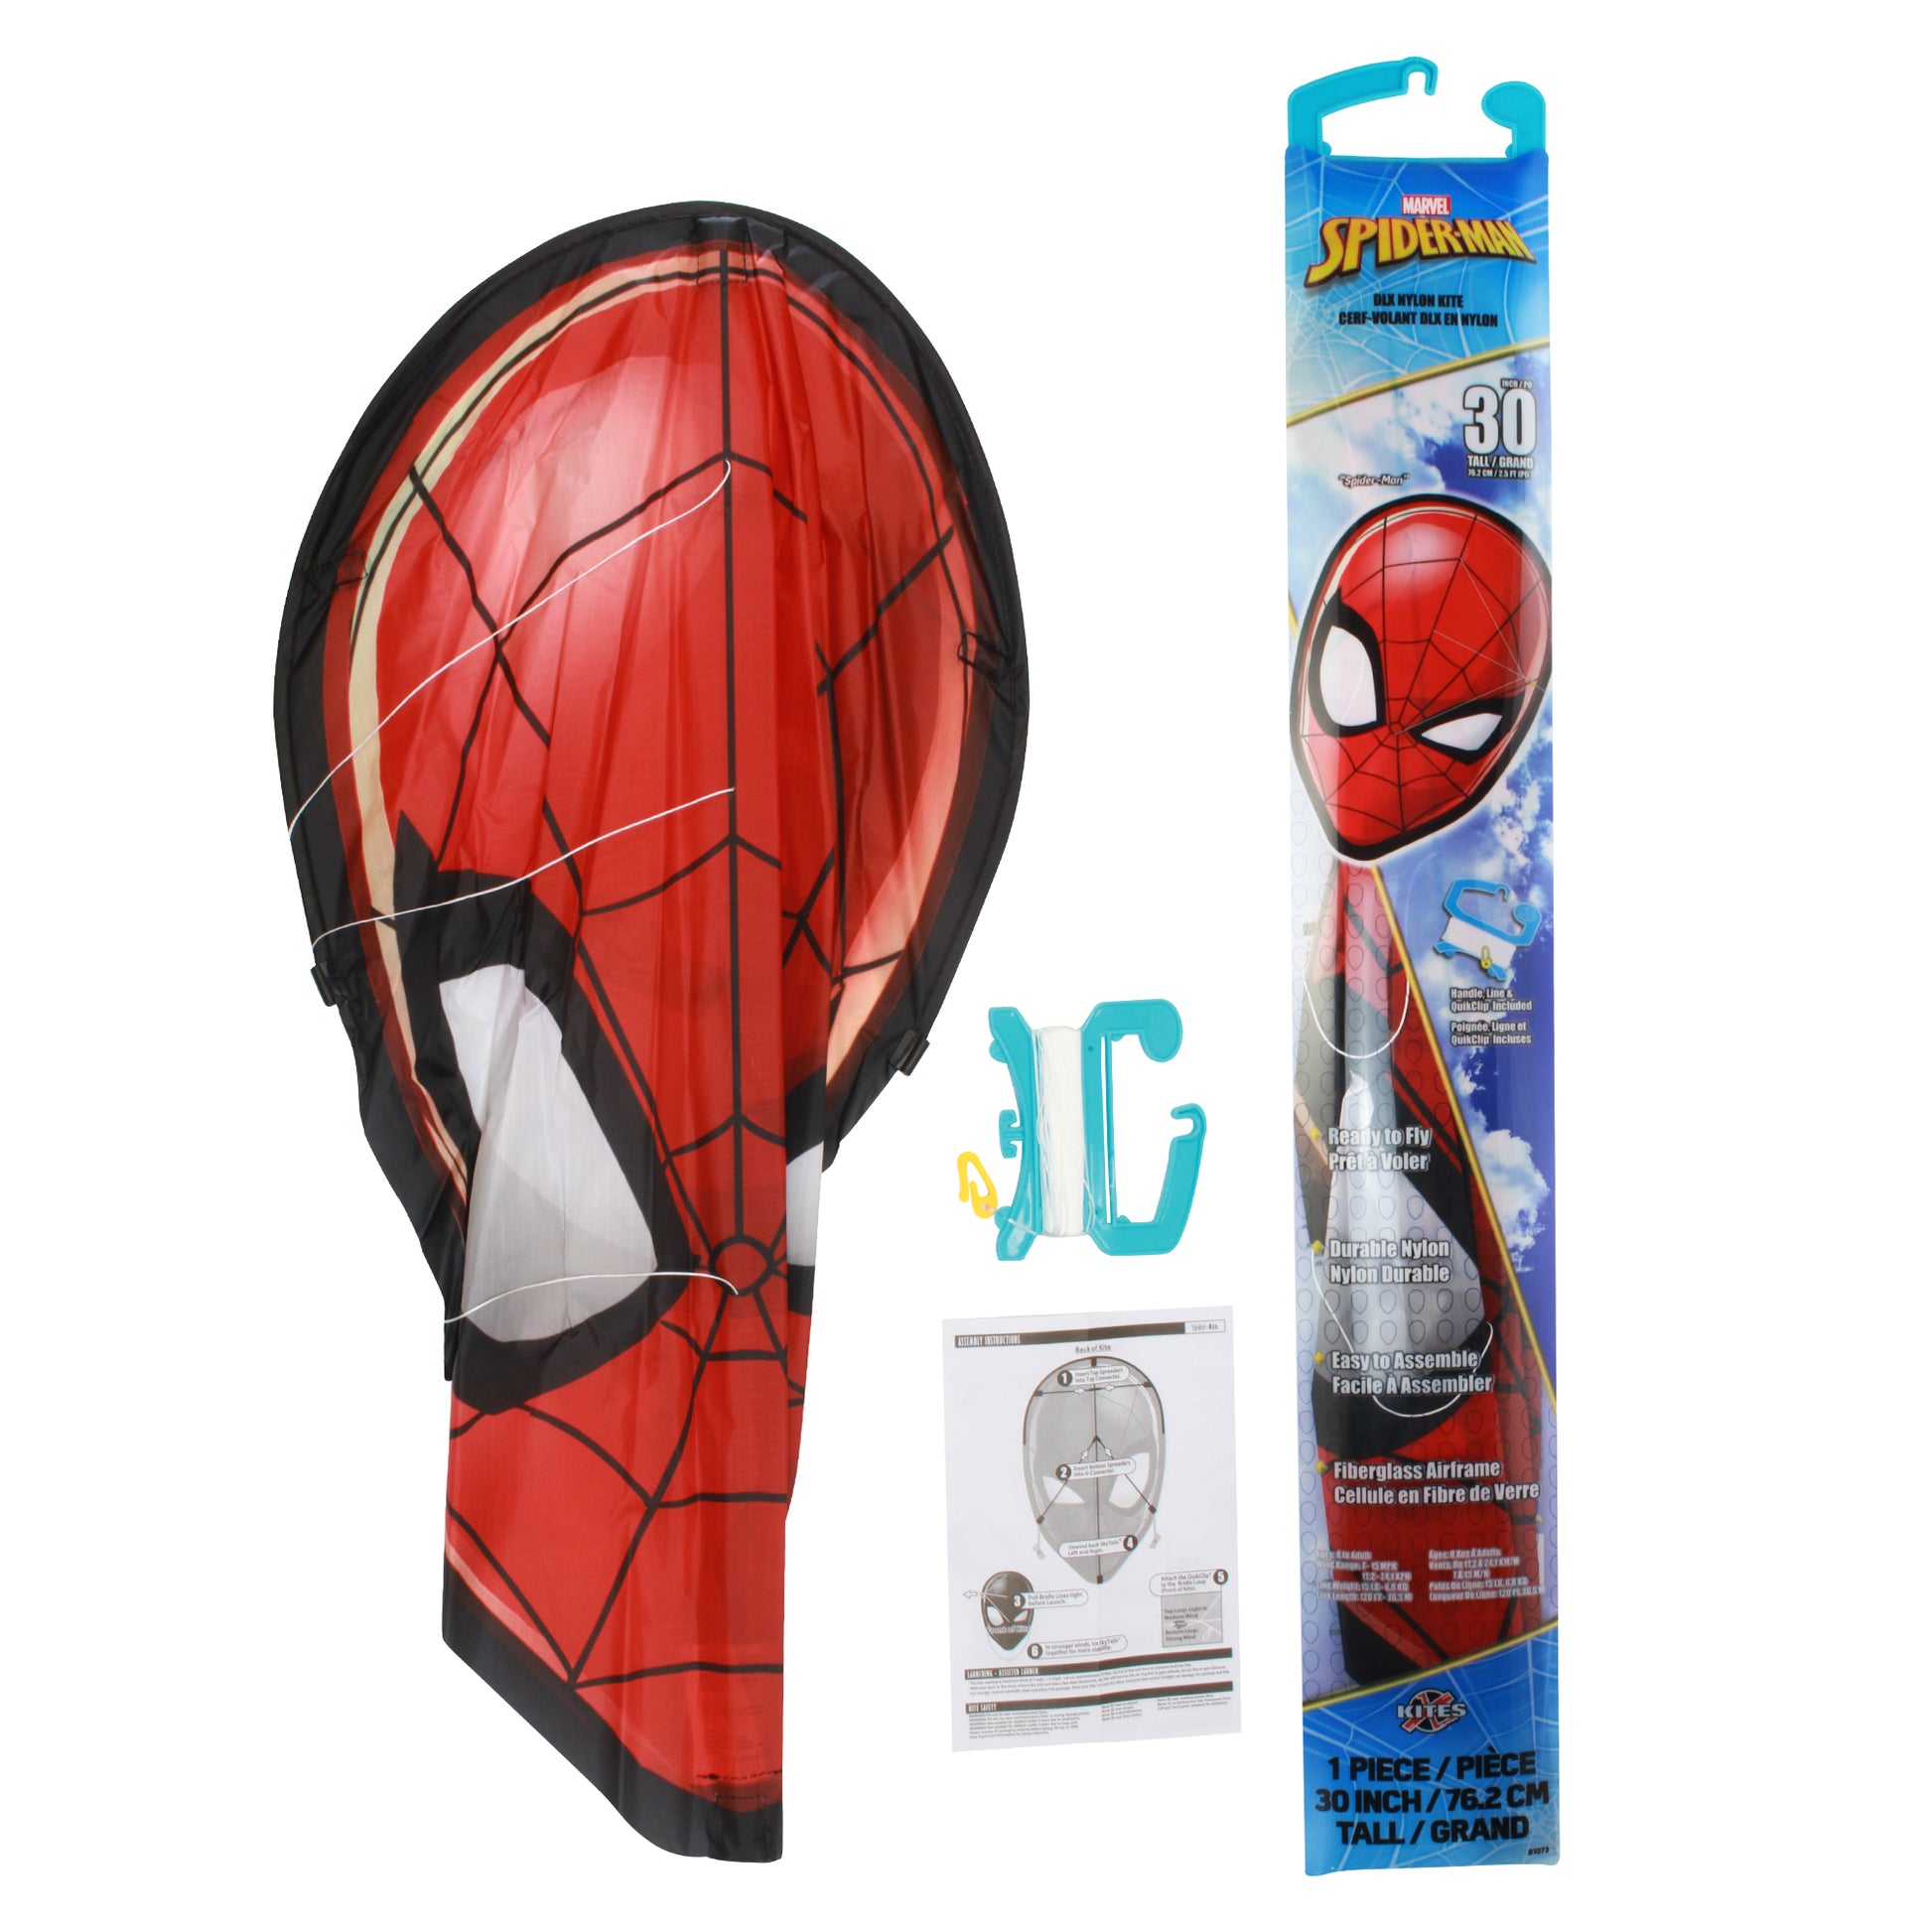 X Kites Face Kite Marvel Spider-Man DLX Nylon Kite packaging and contents